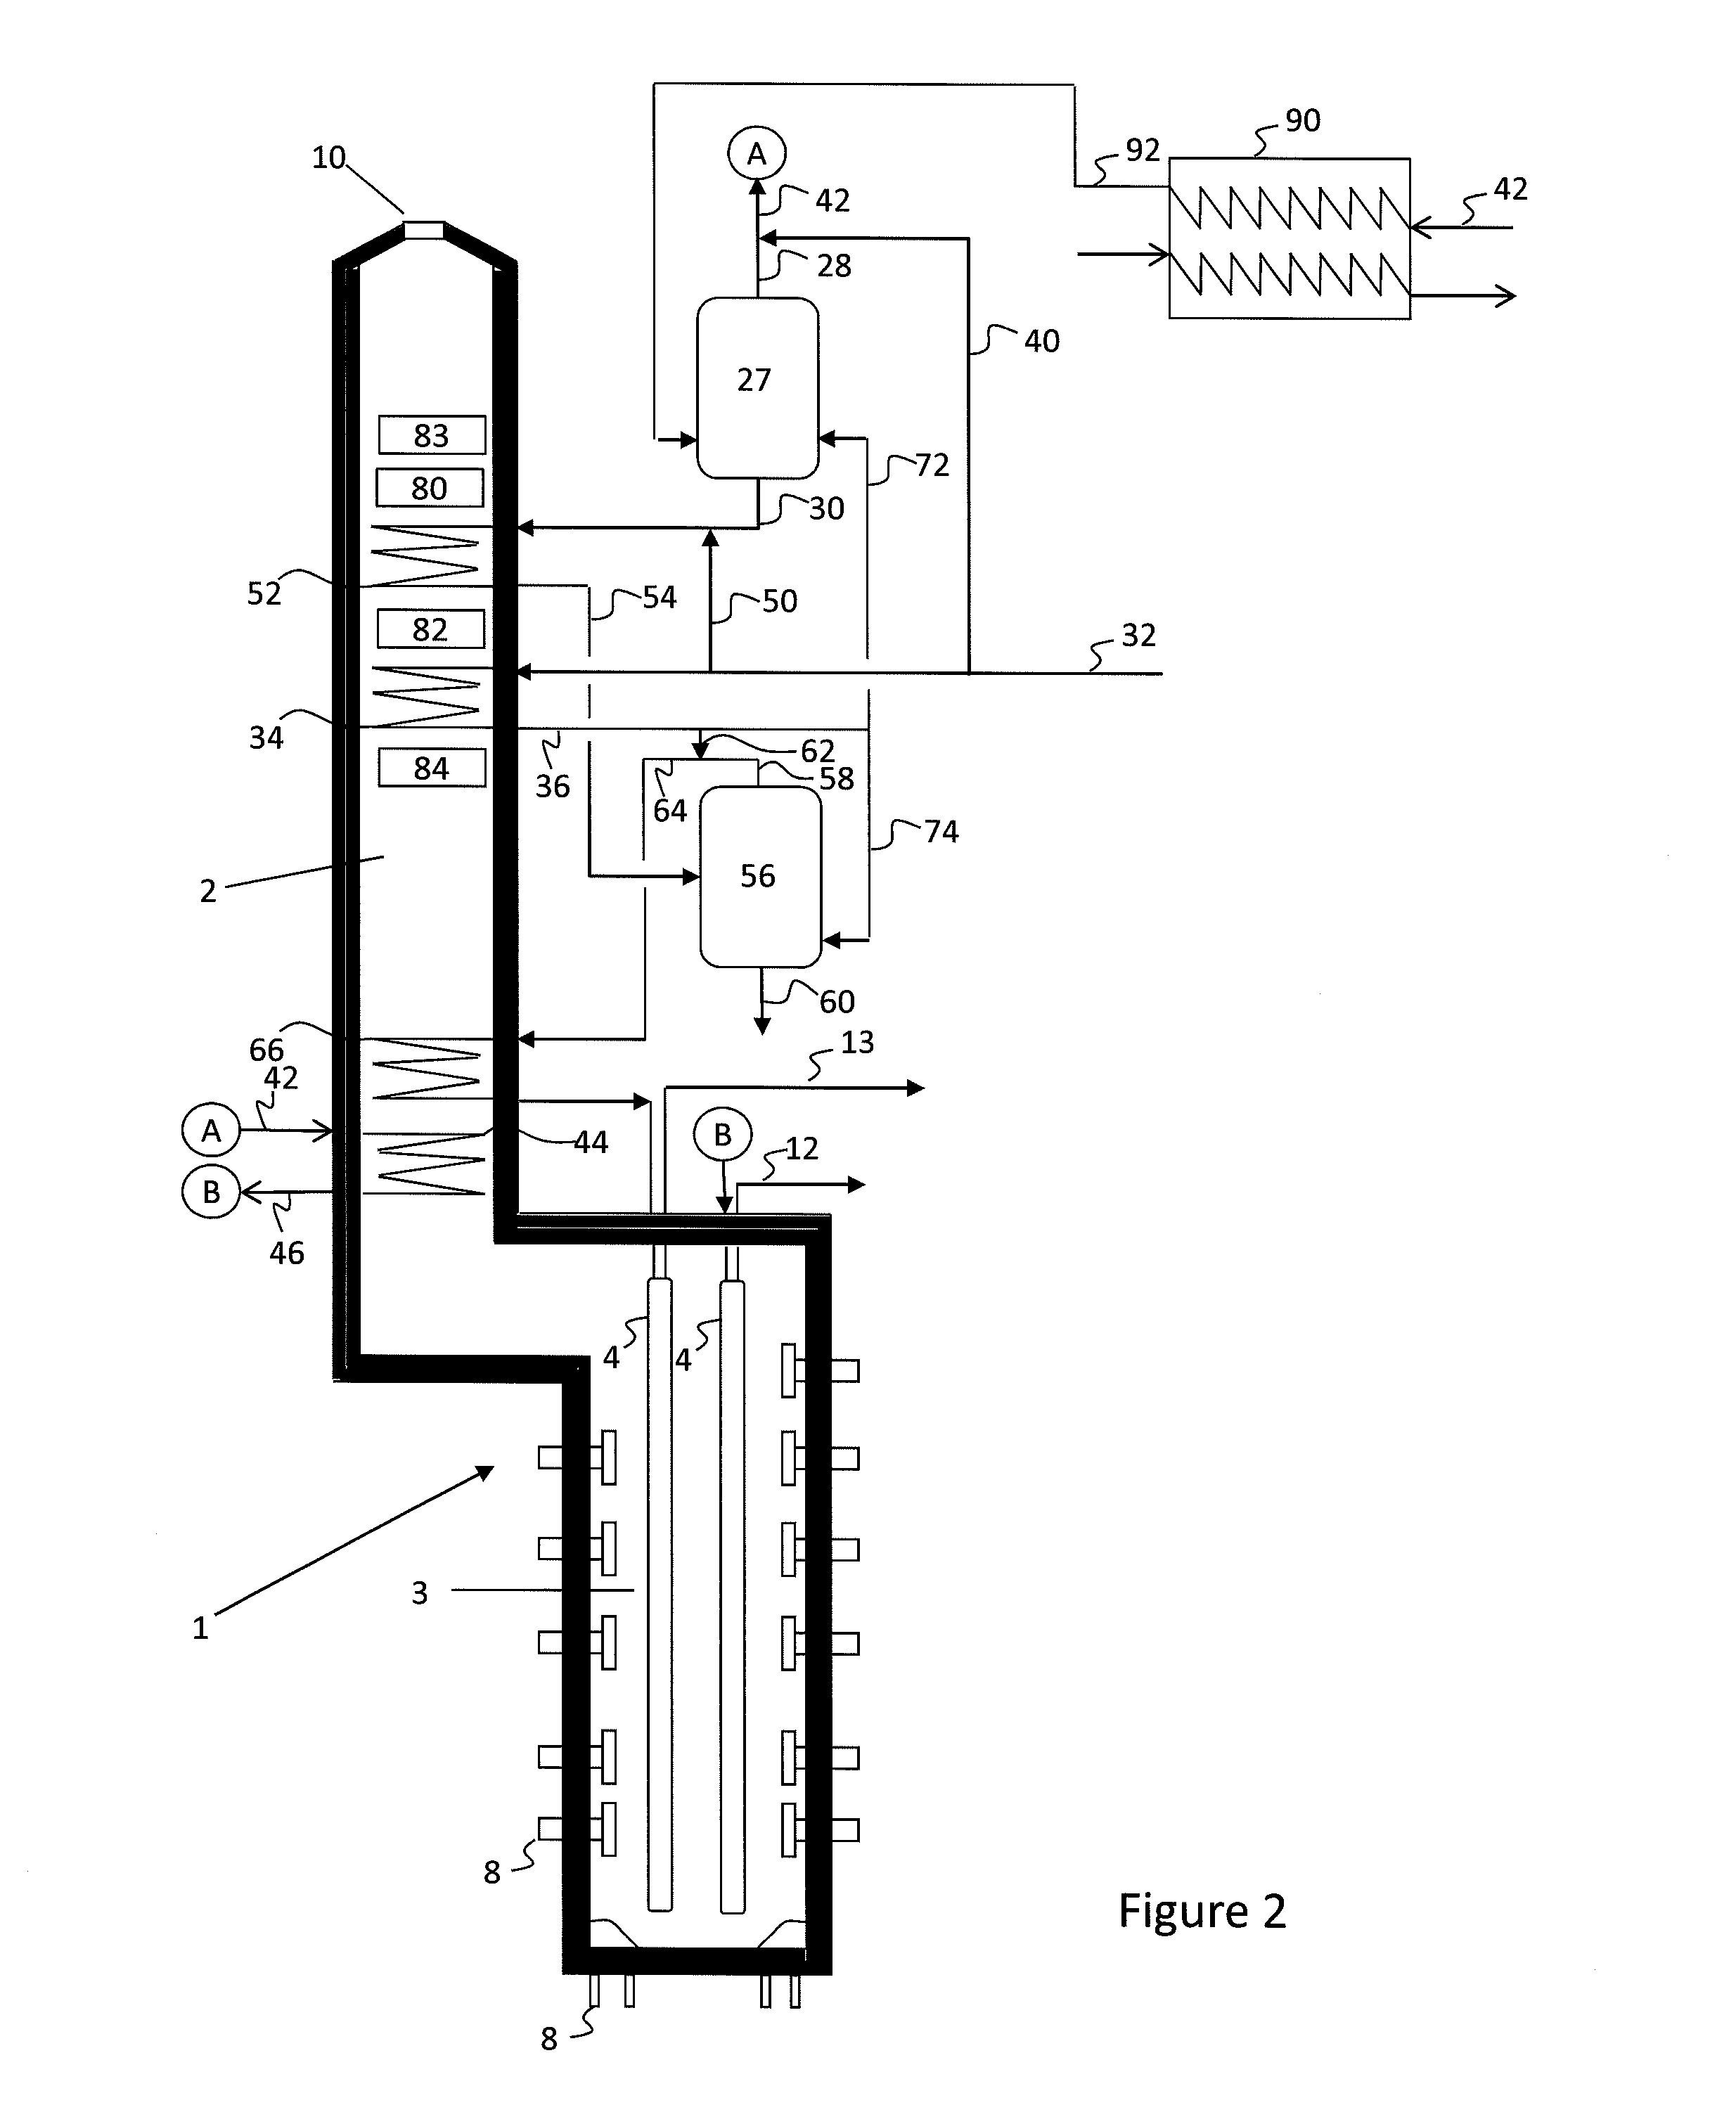 Thermal cracking of crudes and heavy feeds to produce olefins in pyrolysis reactor